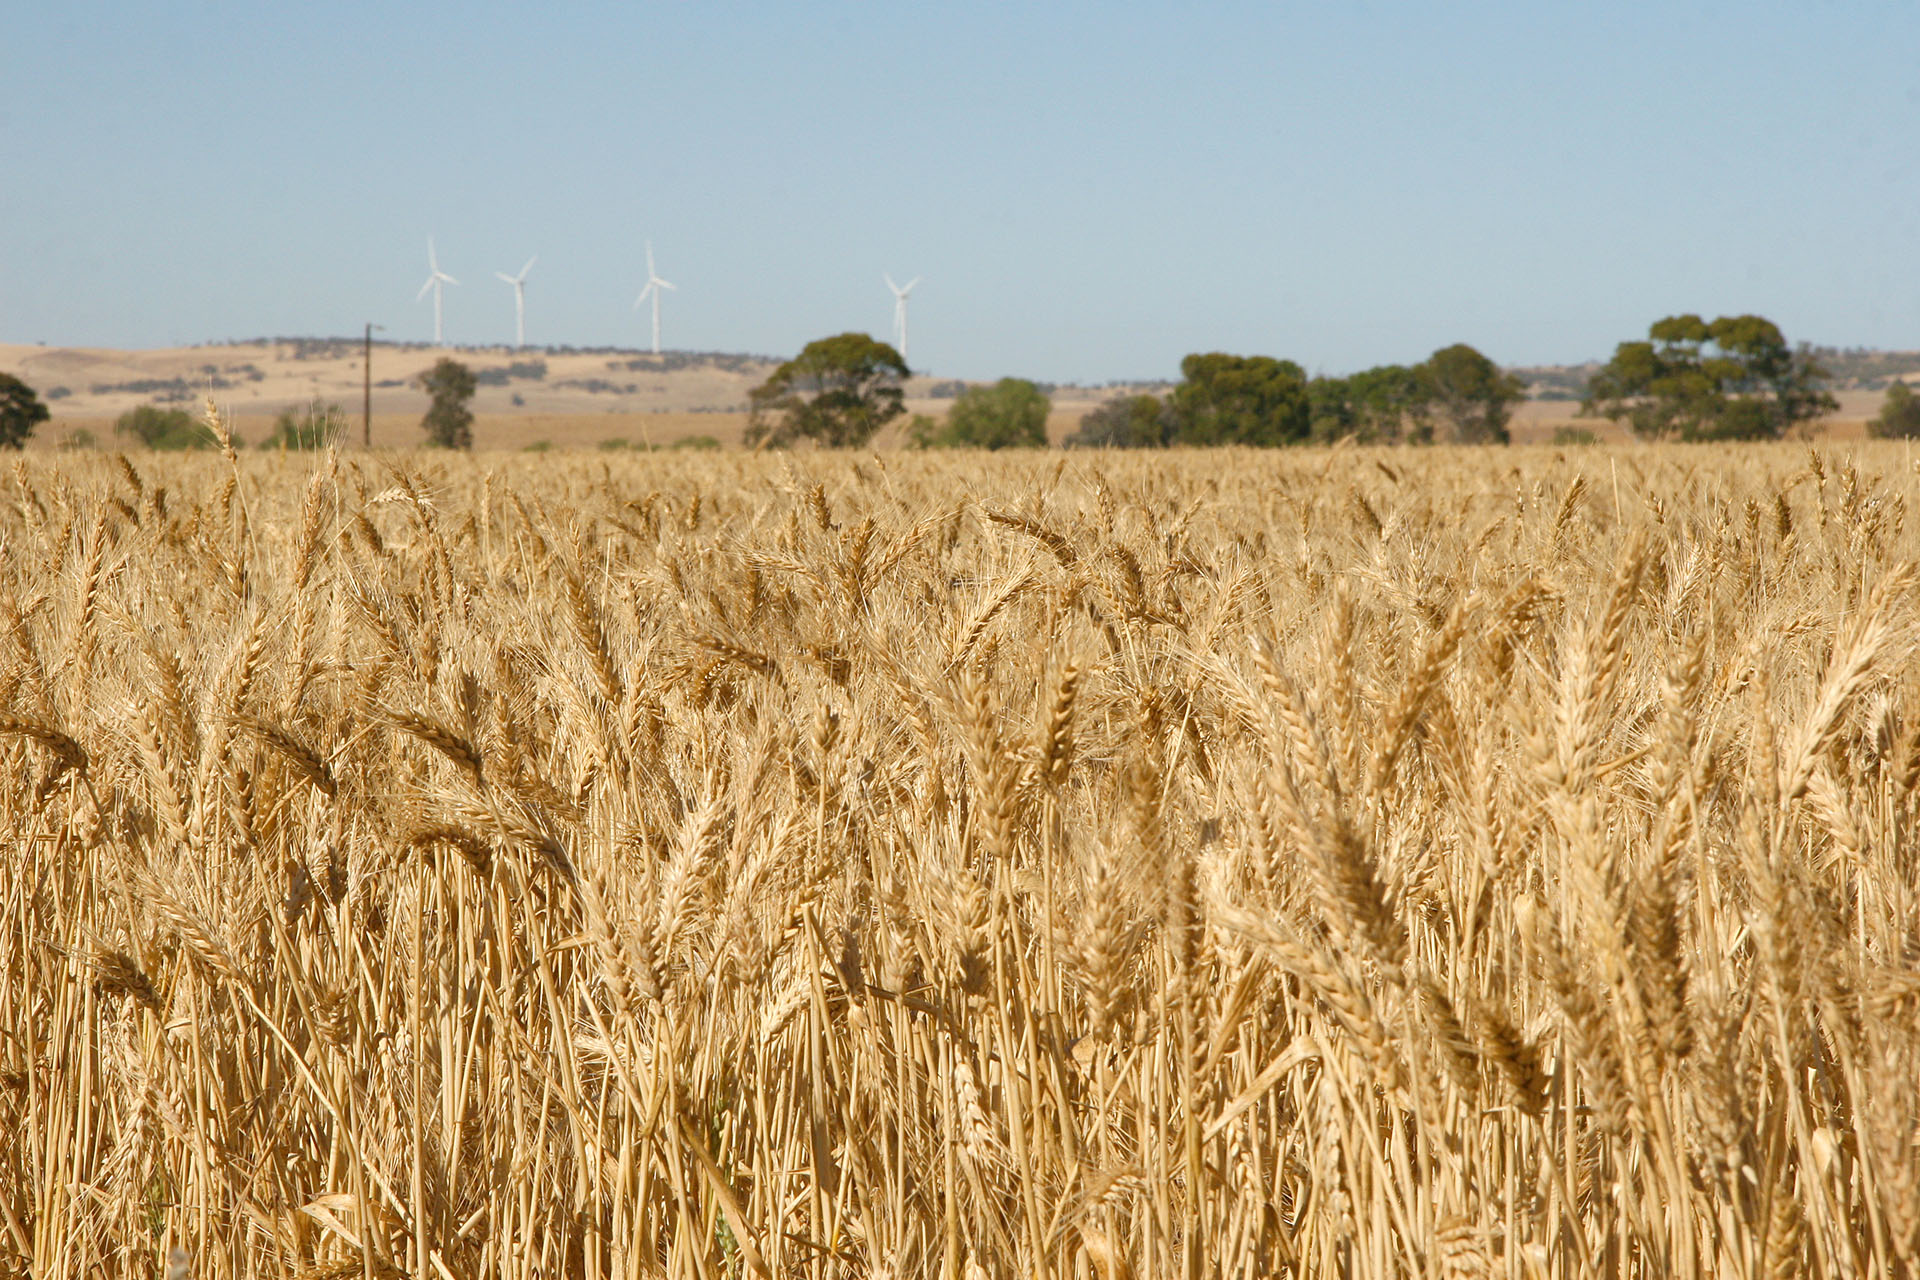 Wheat and windmills: a typical look of the area.